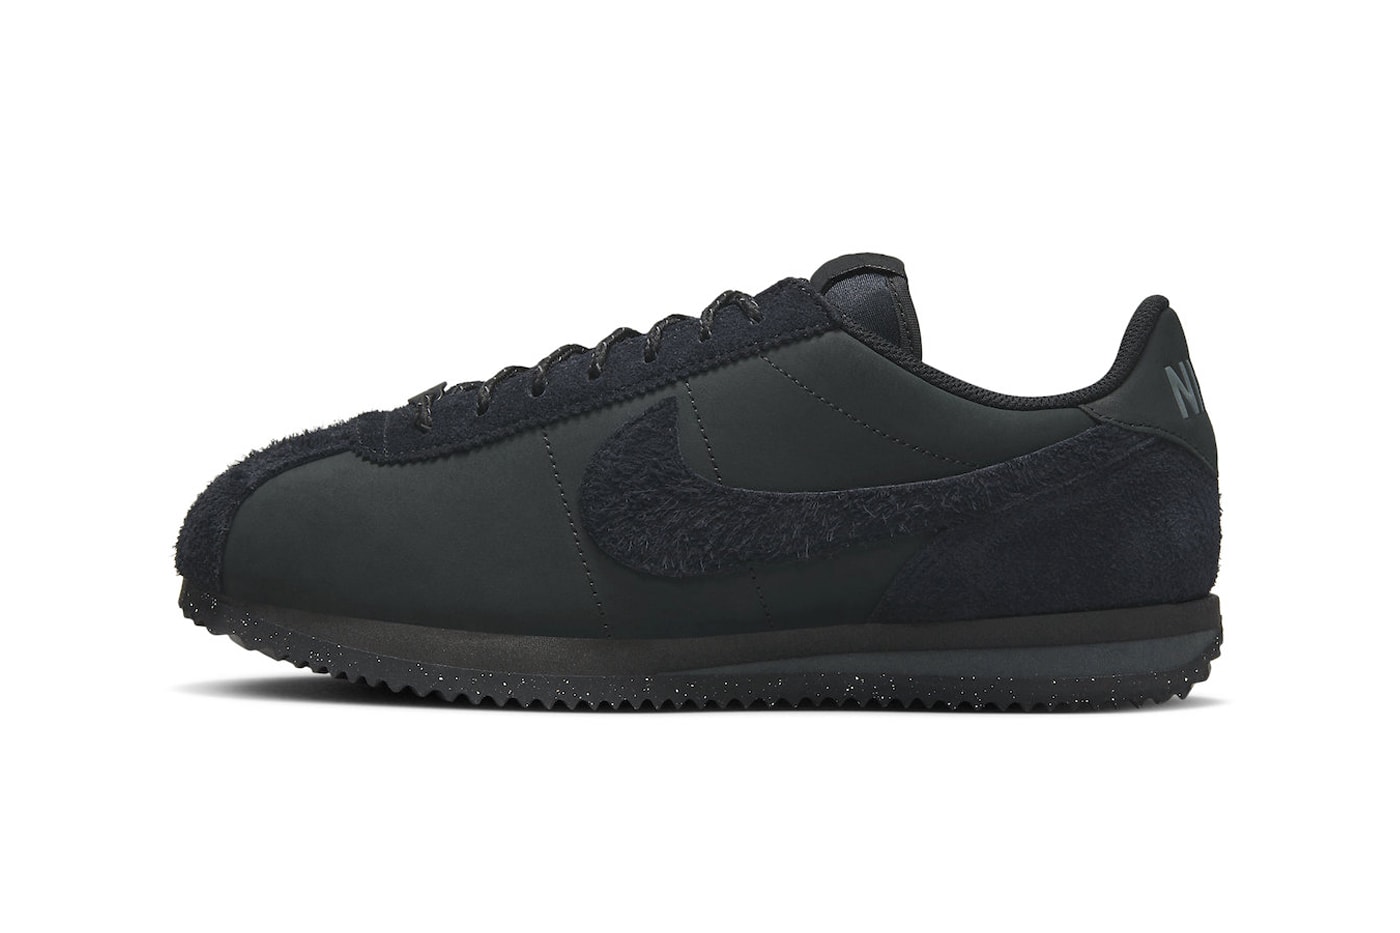 Nike Gets Stealthy This Summer With The Cortez Premium Triple Black -  Sneaker News